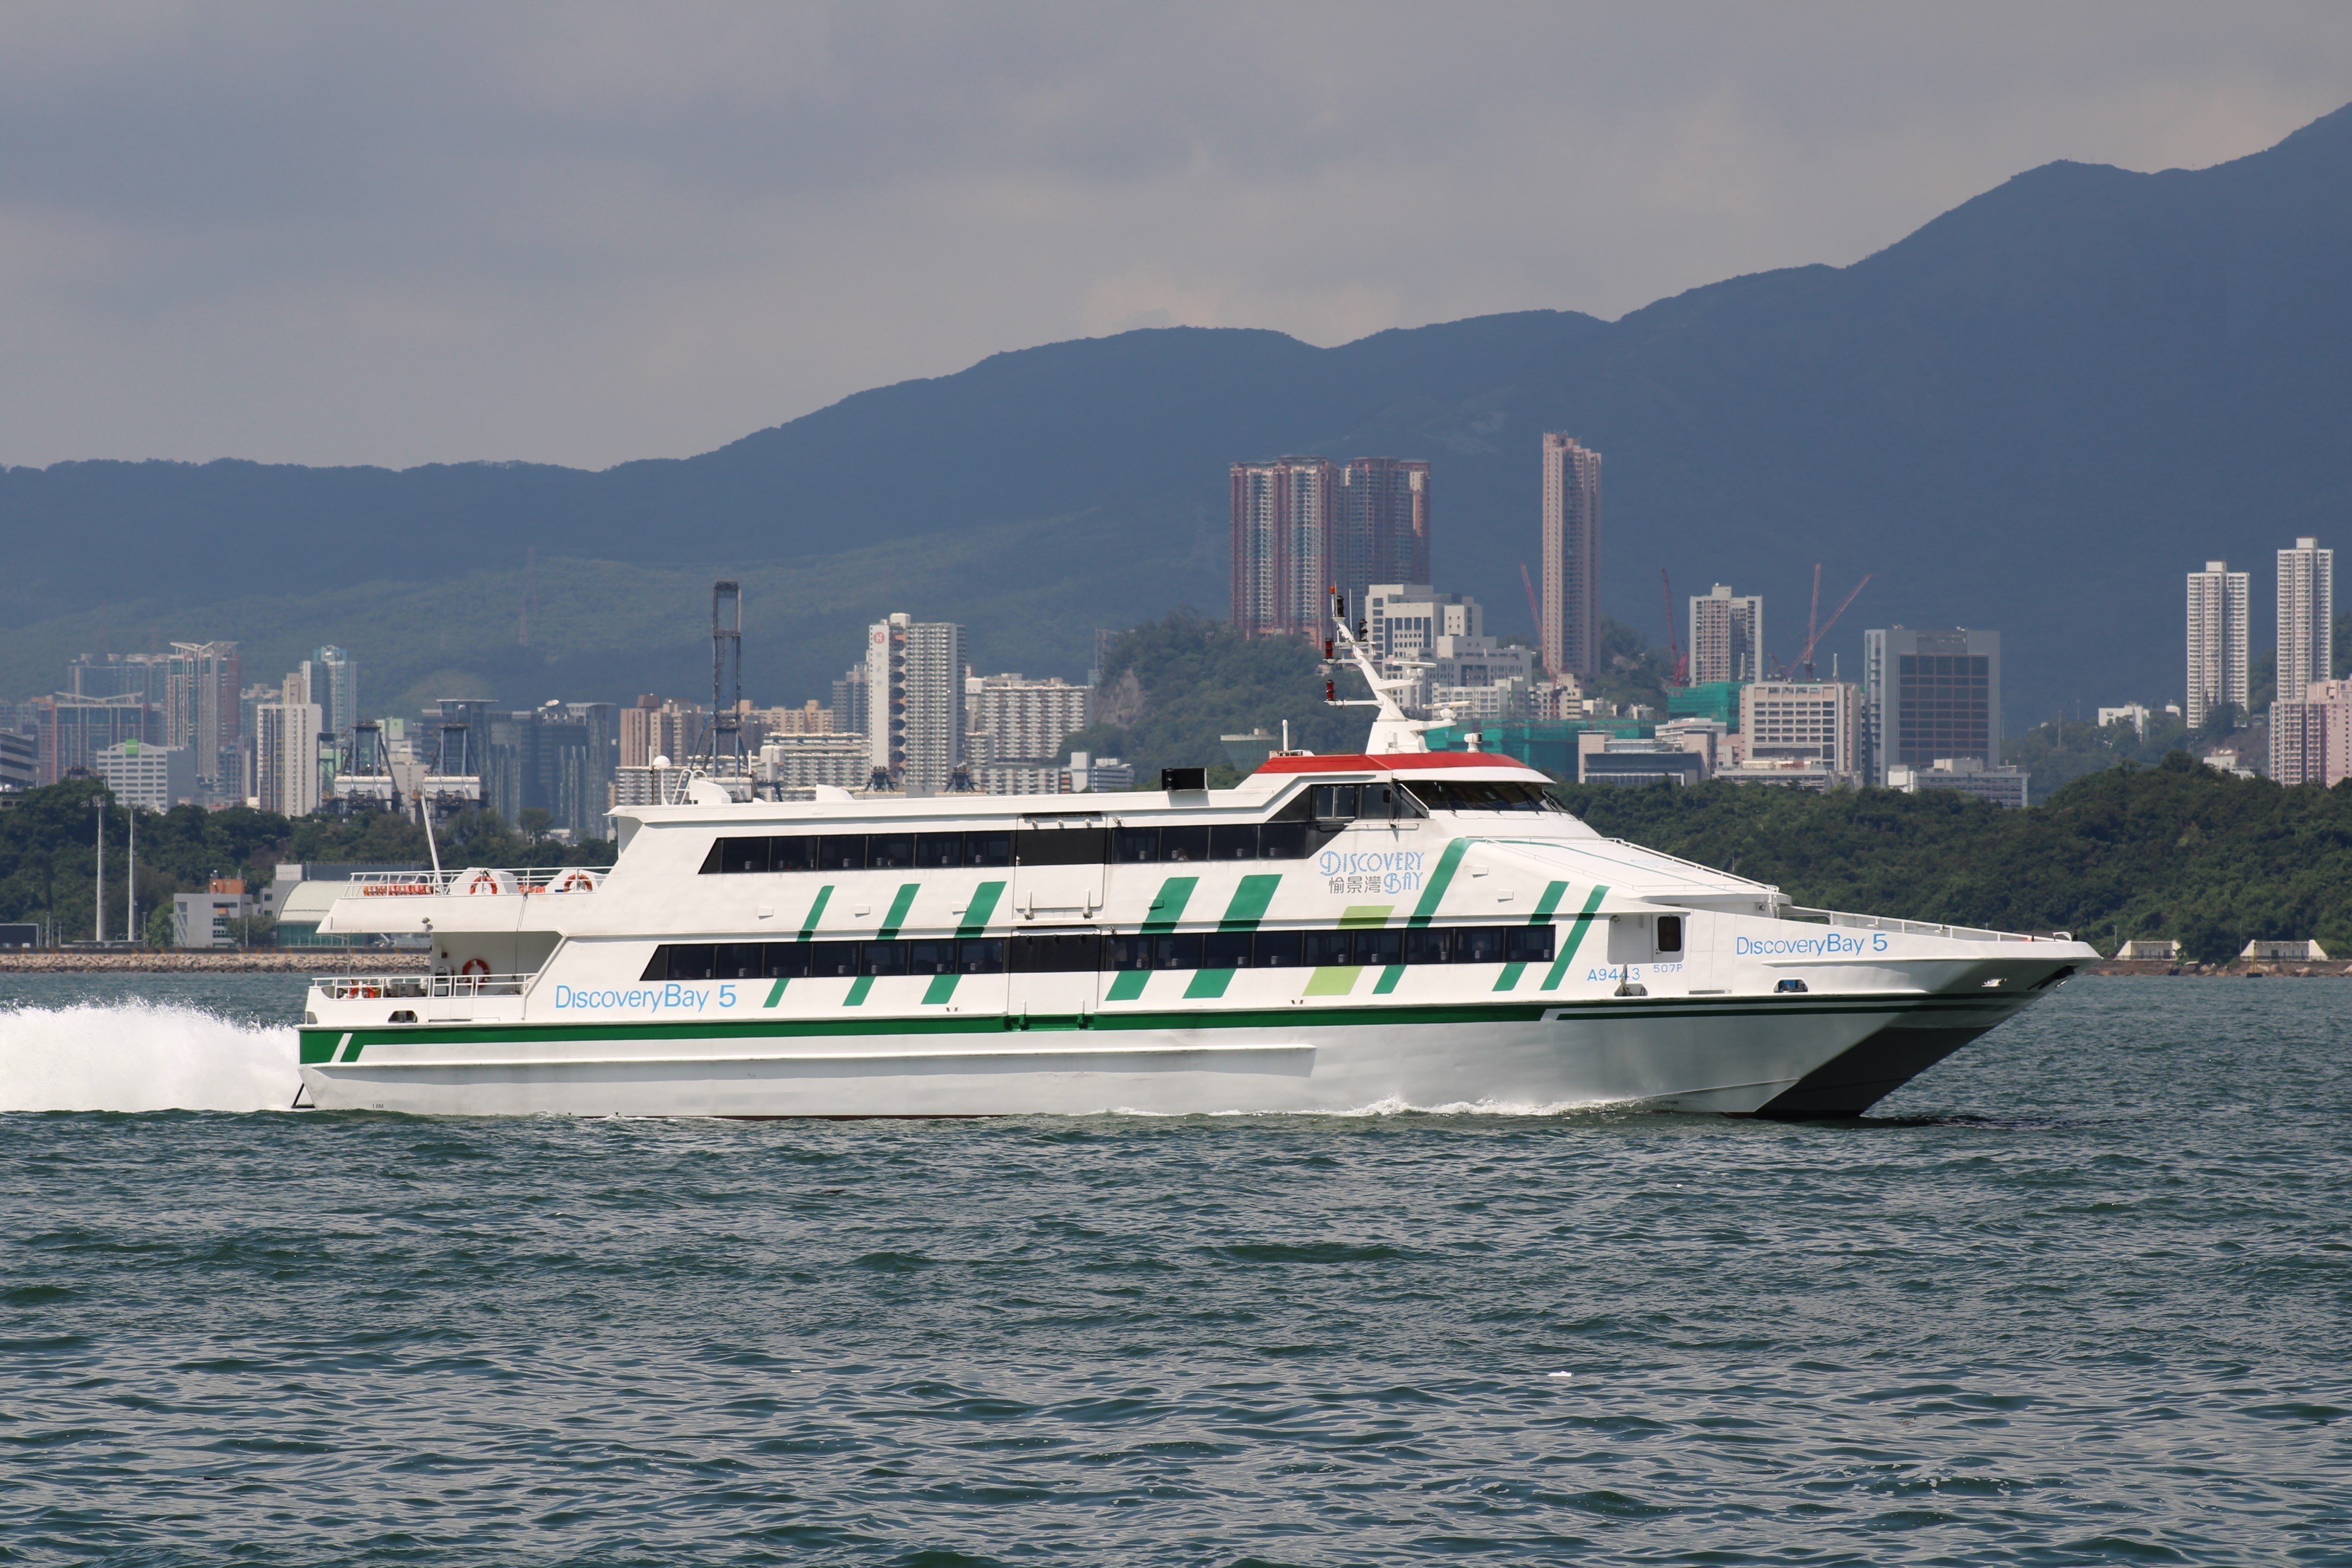 A ferry serving the Discovery Bay route sails through Victoria Harbour in June 2023. Photo: Shutterstock